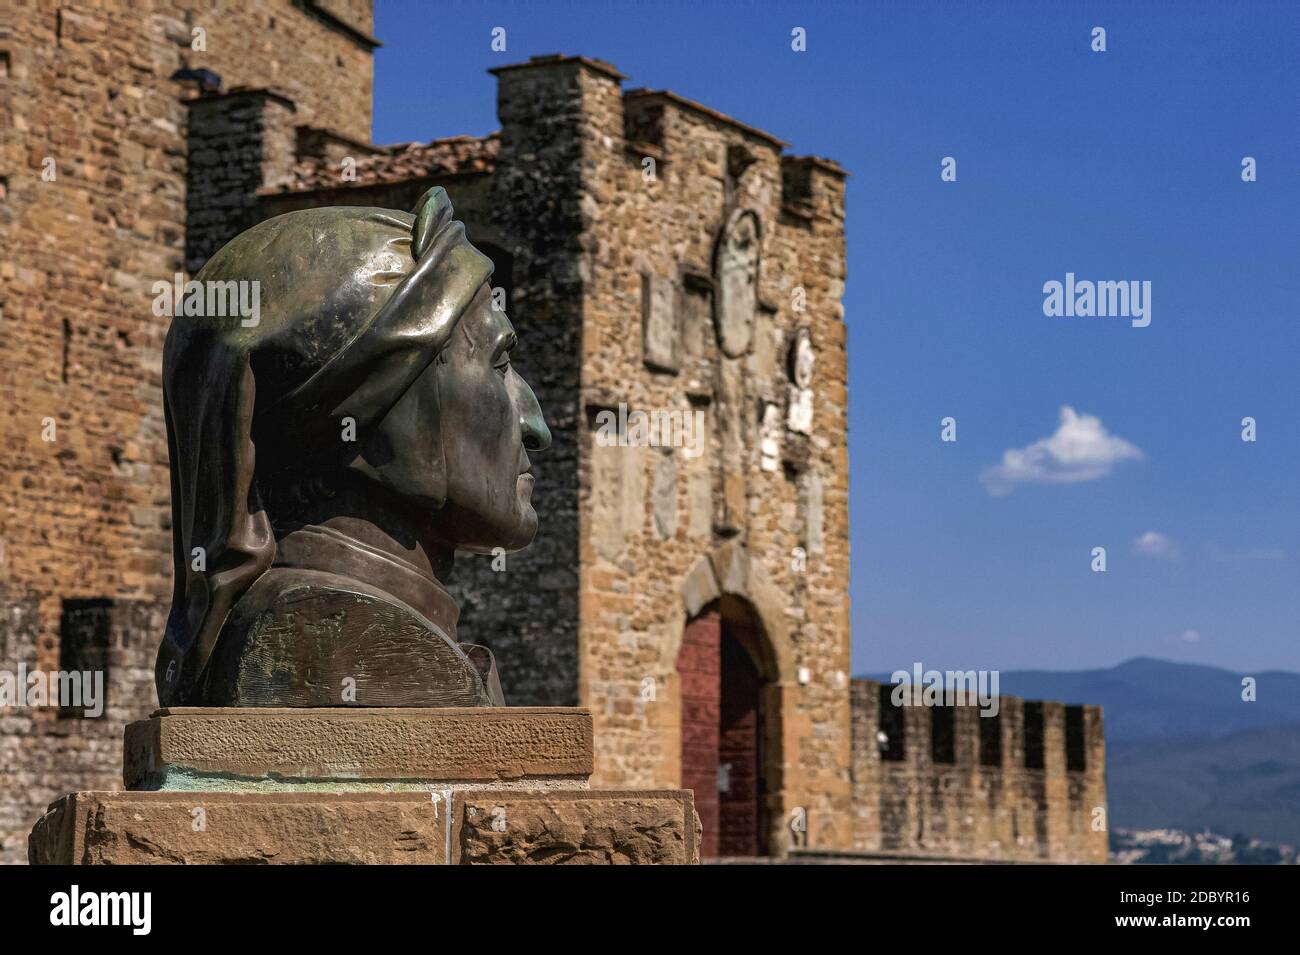 Bronze bust of Italian poet Dante Alighieri (c. 1265-1321) by the Munition Tower, or Antiporta della Munizione, of the medieval Castle of the Guidi Counts, or Castello dei Conti Guidi, at Poppi, Tuscany, Italy.  Dante fought at the nearby Battle of Campaldino for the victorious Florentines in 1289.  Poppi castle was built around 1274.  The Munition Tower (in the background) was added as an outer defence in the 1400s. Stock Photo